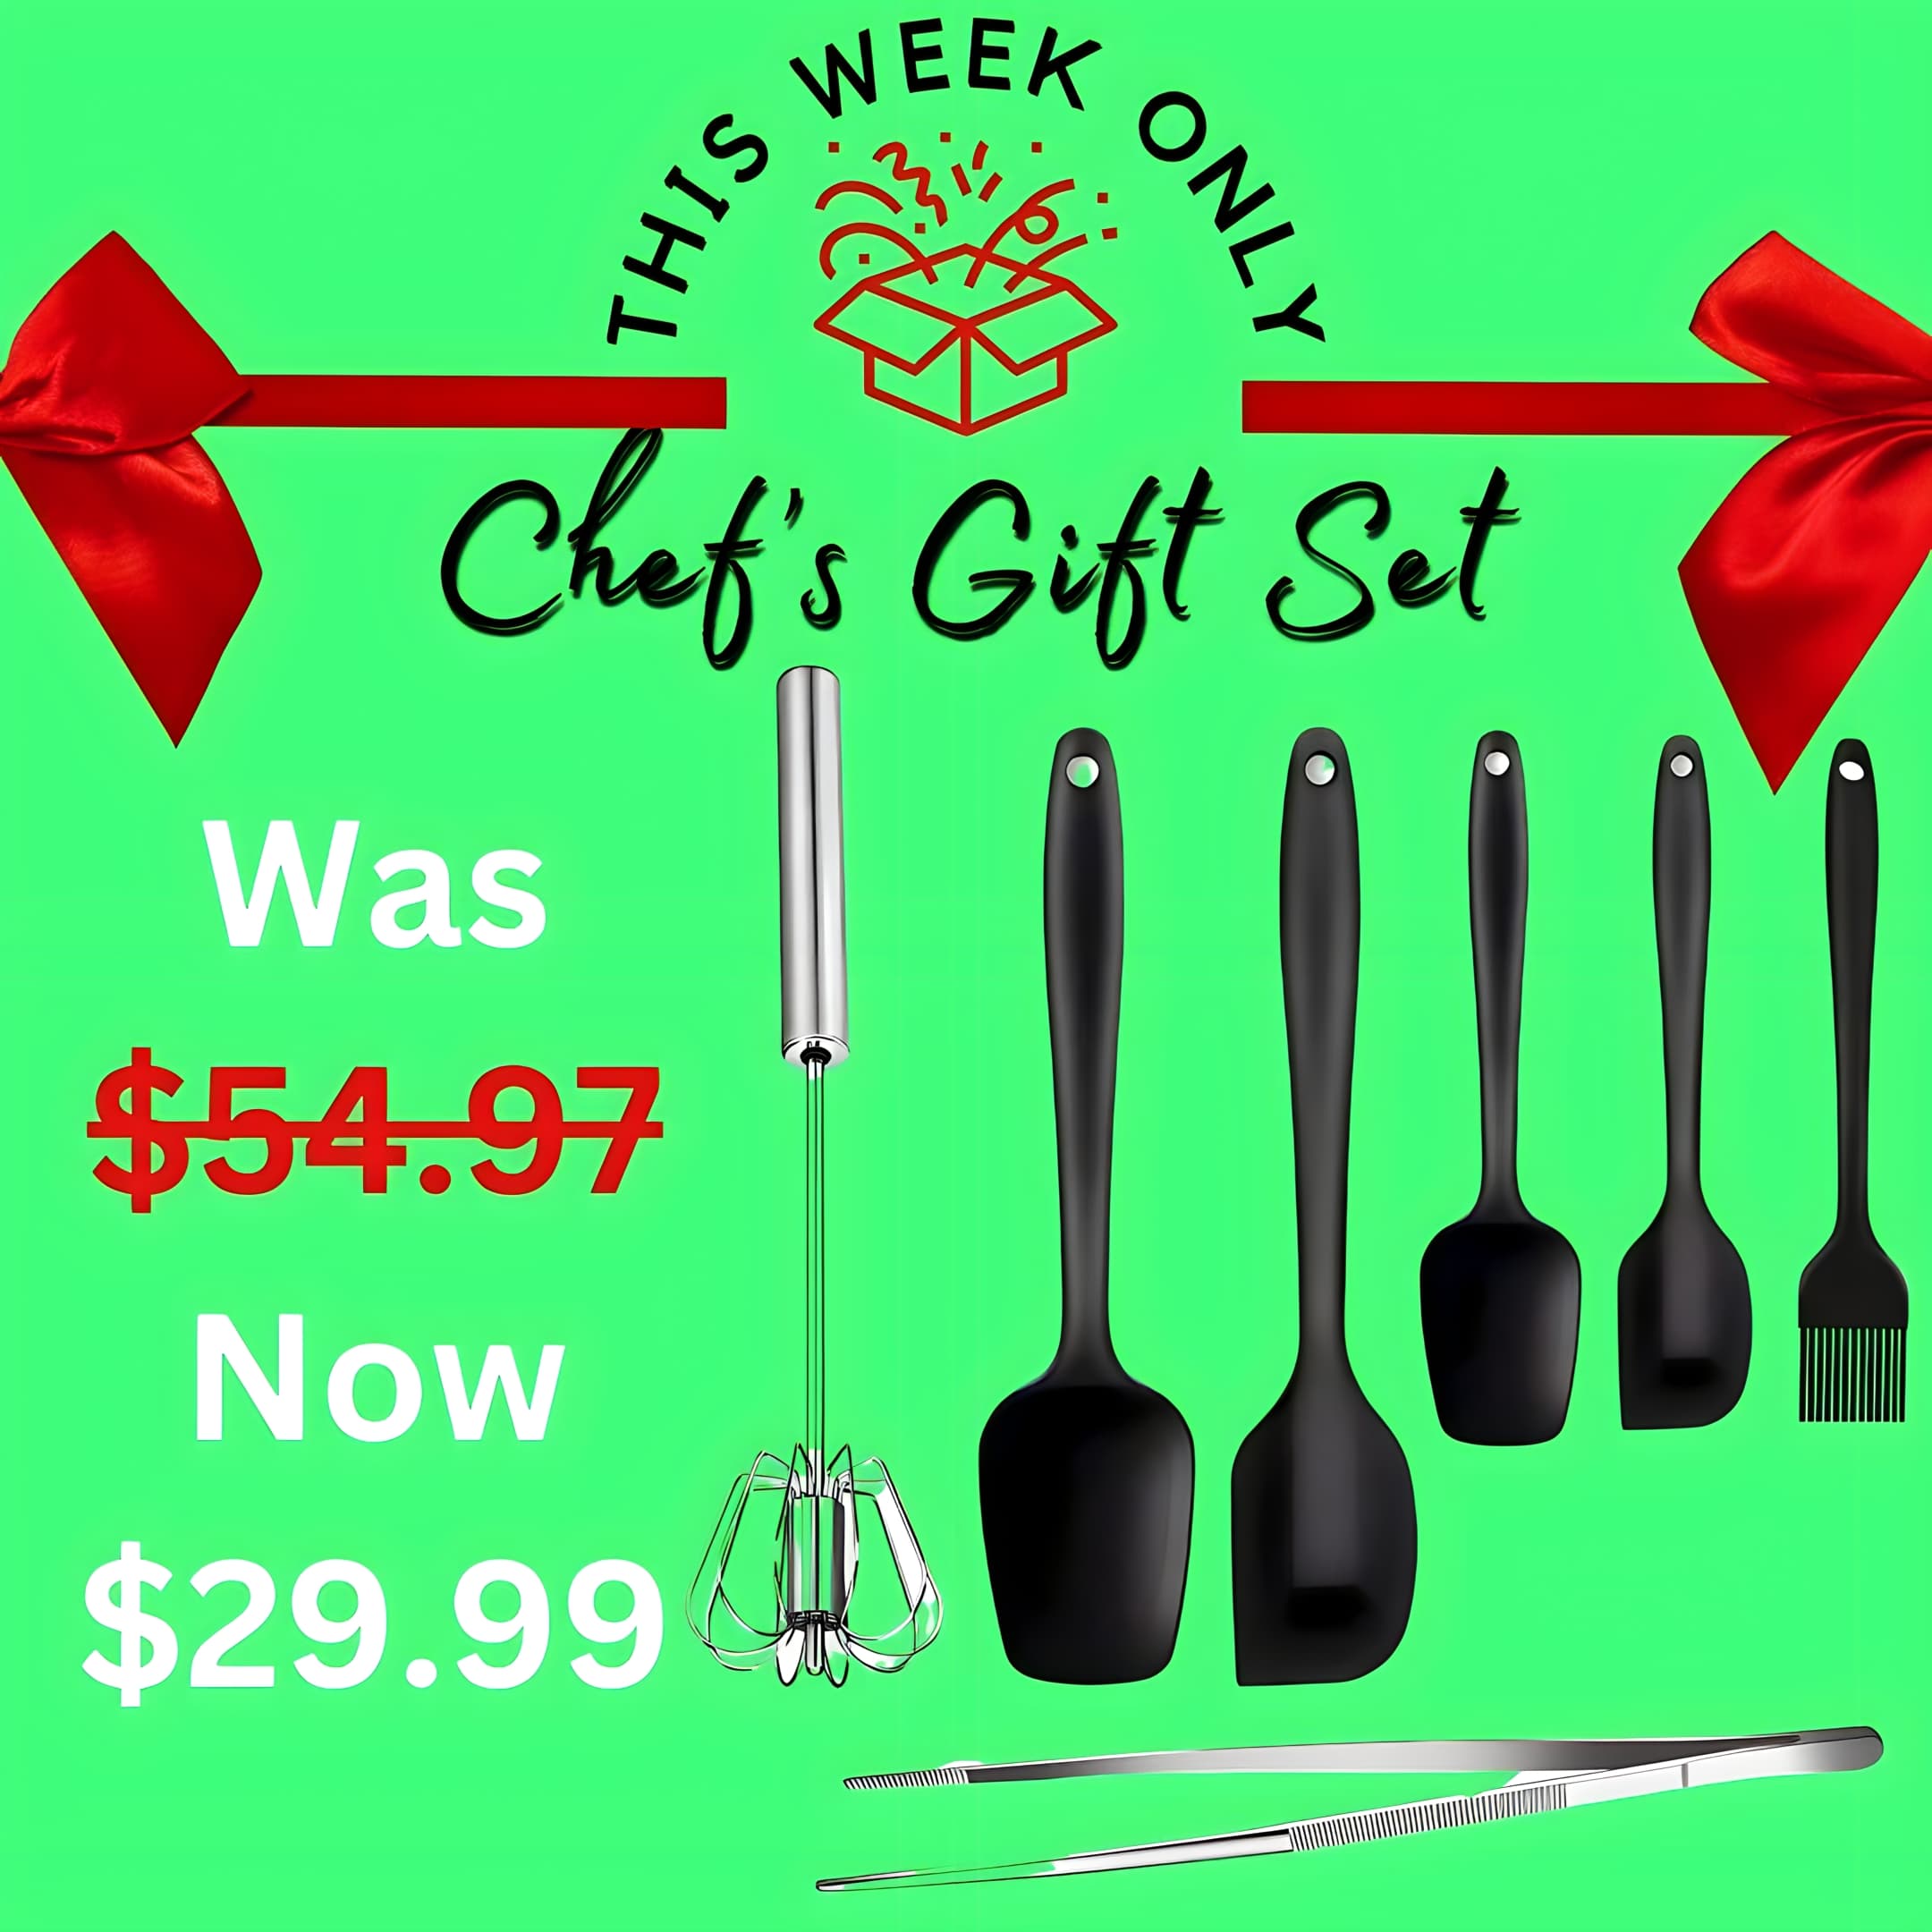 The Black Friday Week: Chef's Gift Set